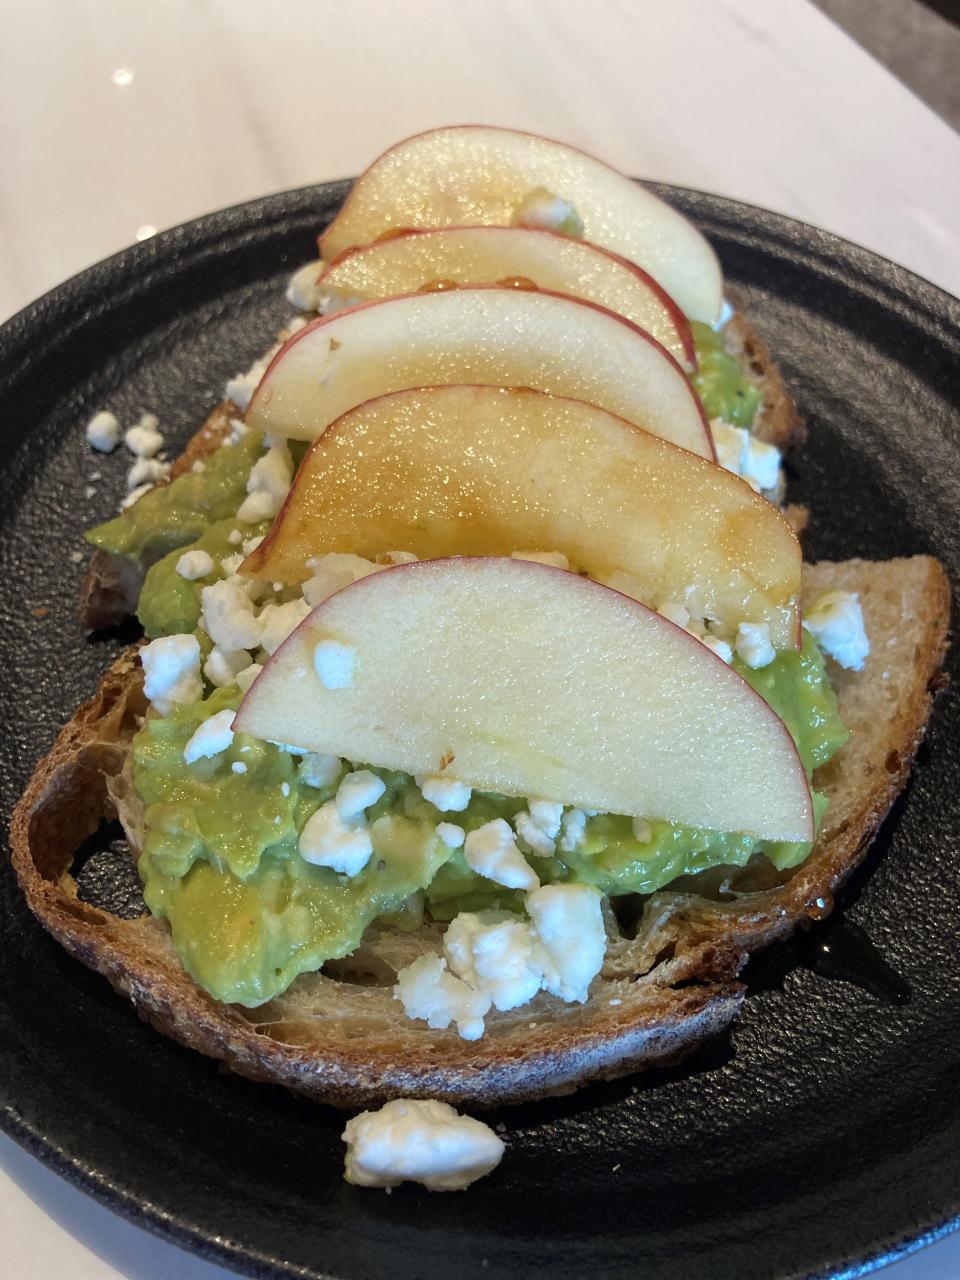 Avocado toast with apples, goat cheese and honey at The Granola Bar in Rye. Photographed Jan. 18, 2023.